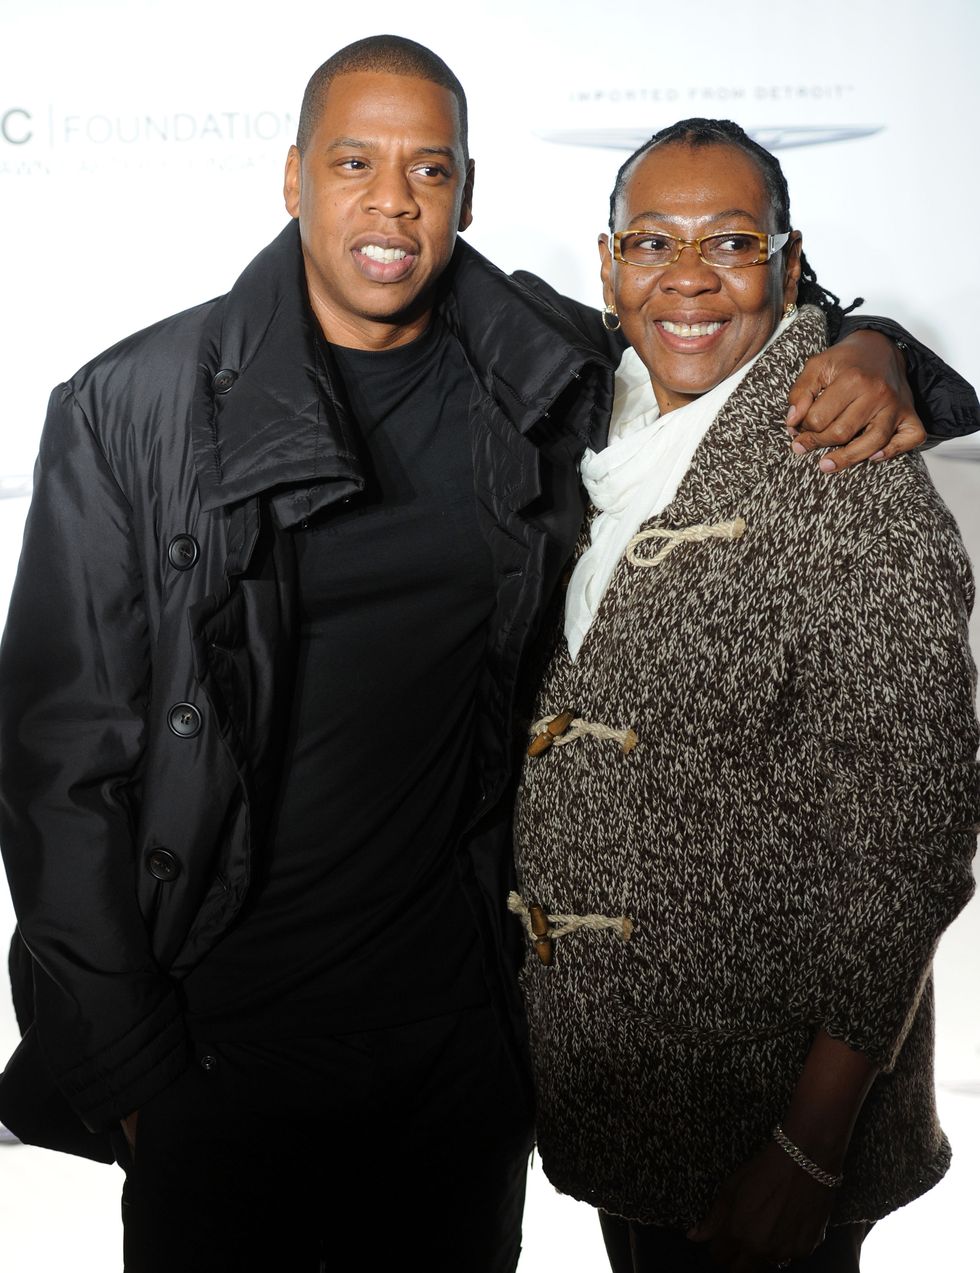 The Shawn Carter Foundation Hosts An Evening of "Making The Ordinary Extraordinary"